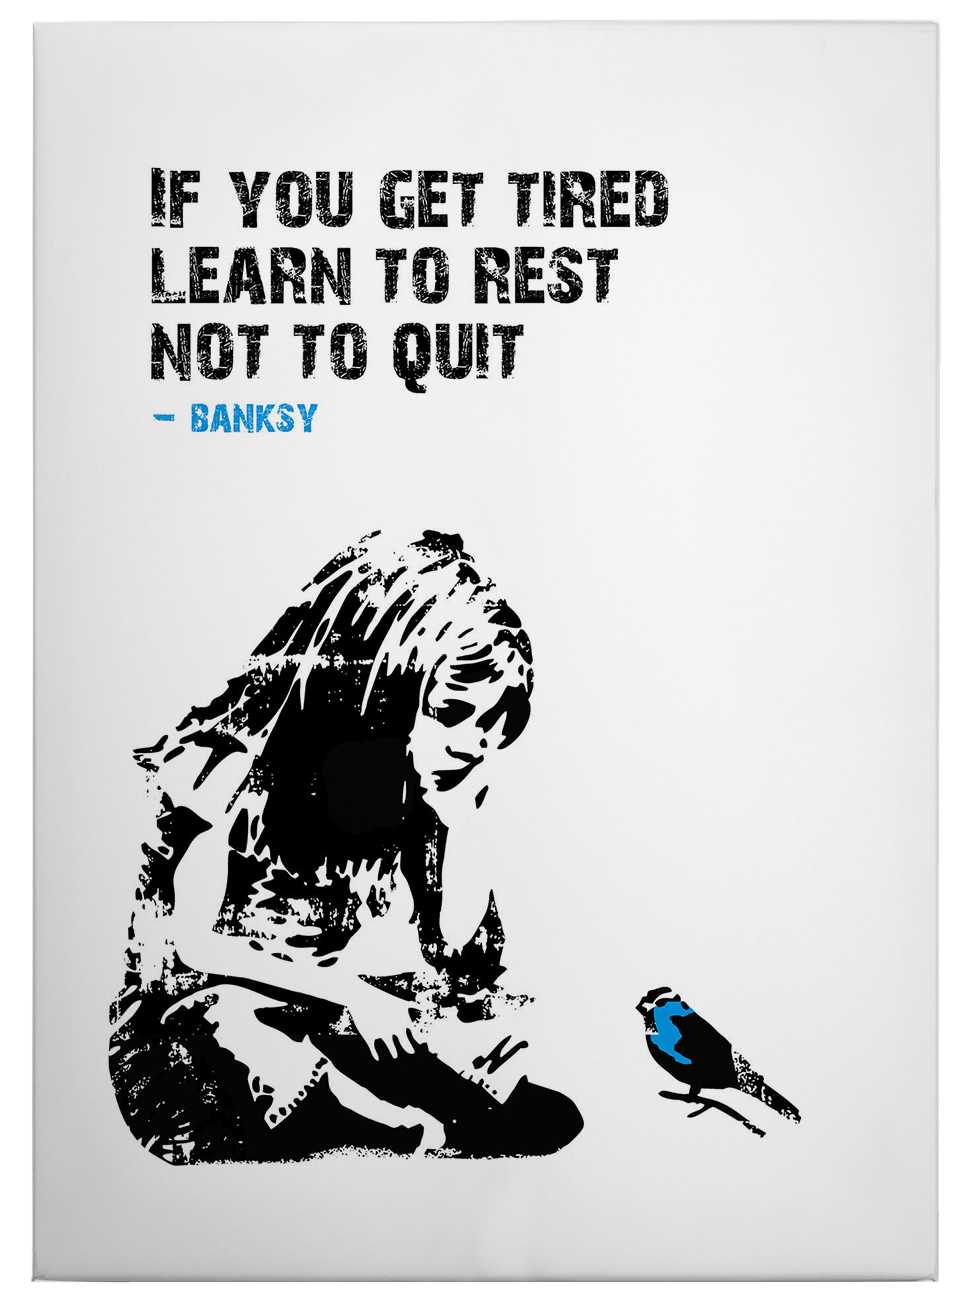             Toile "If you get tired" de Banksy - 0,50 m x 0,70 m
        